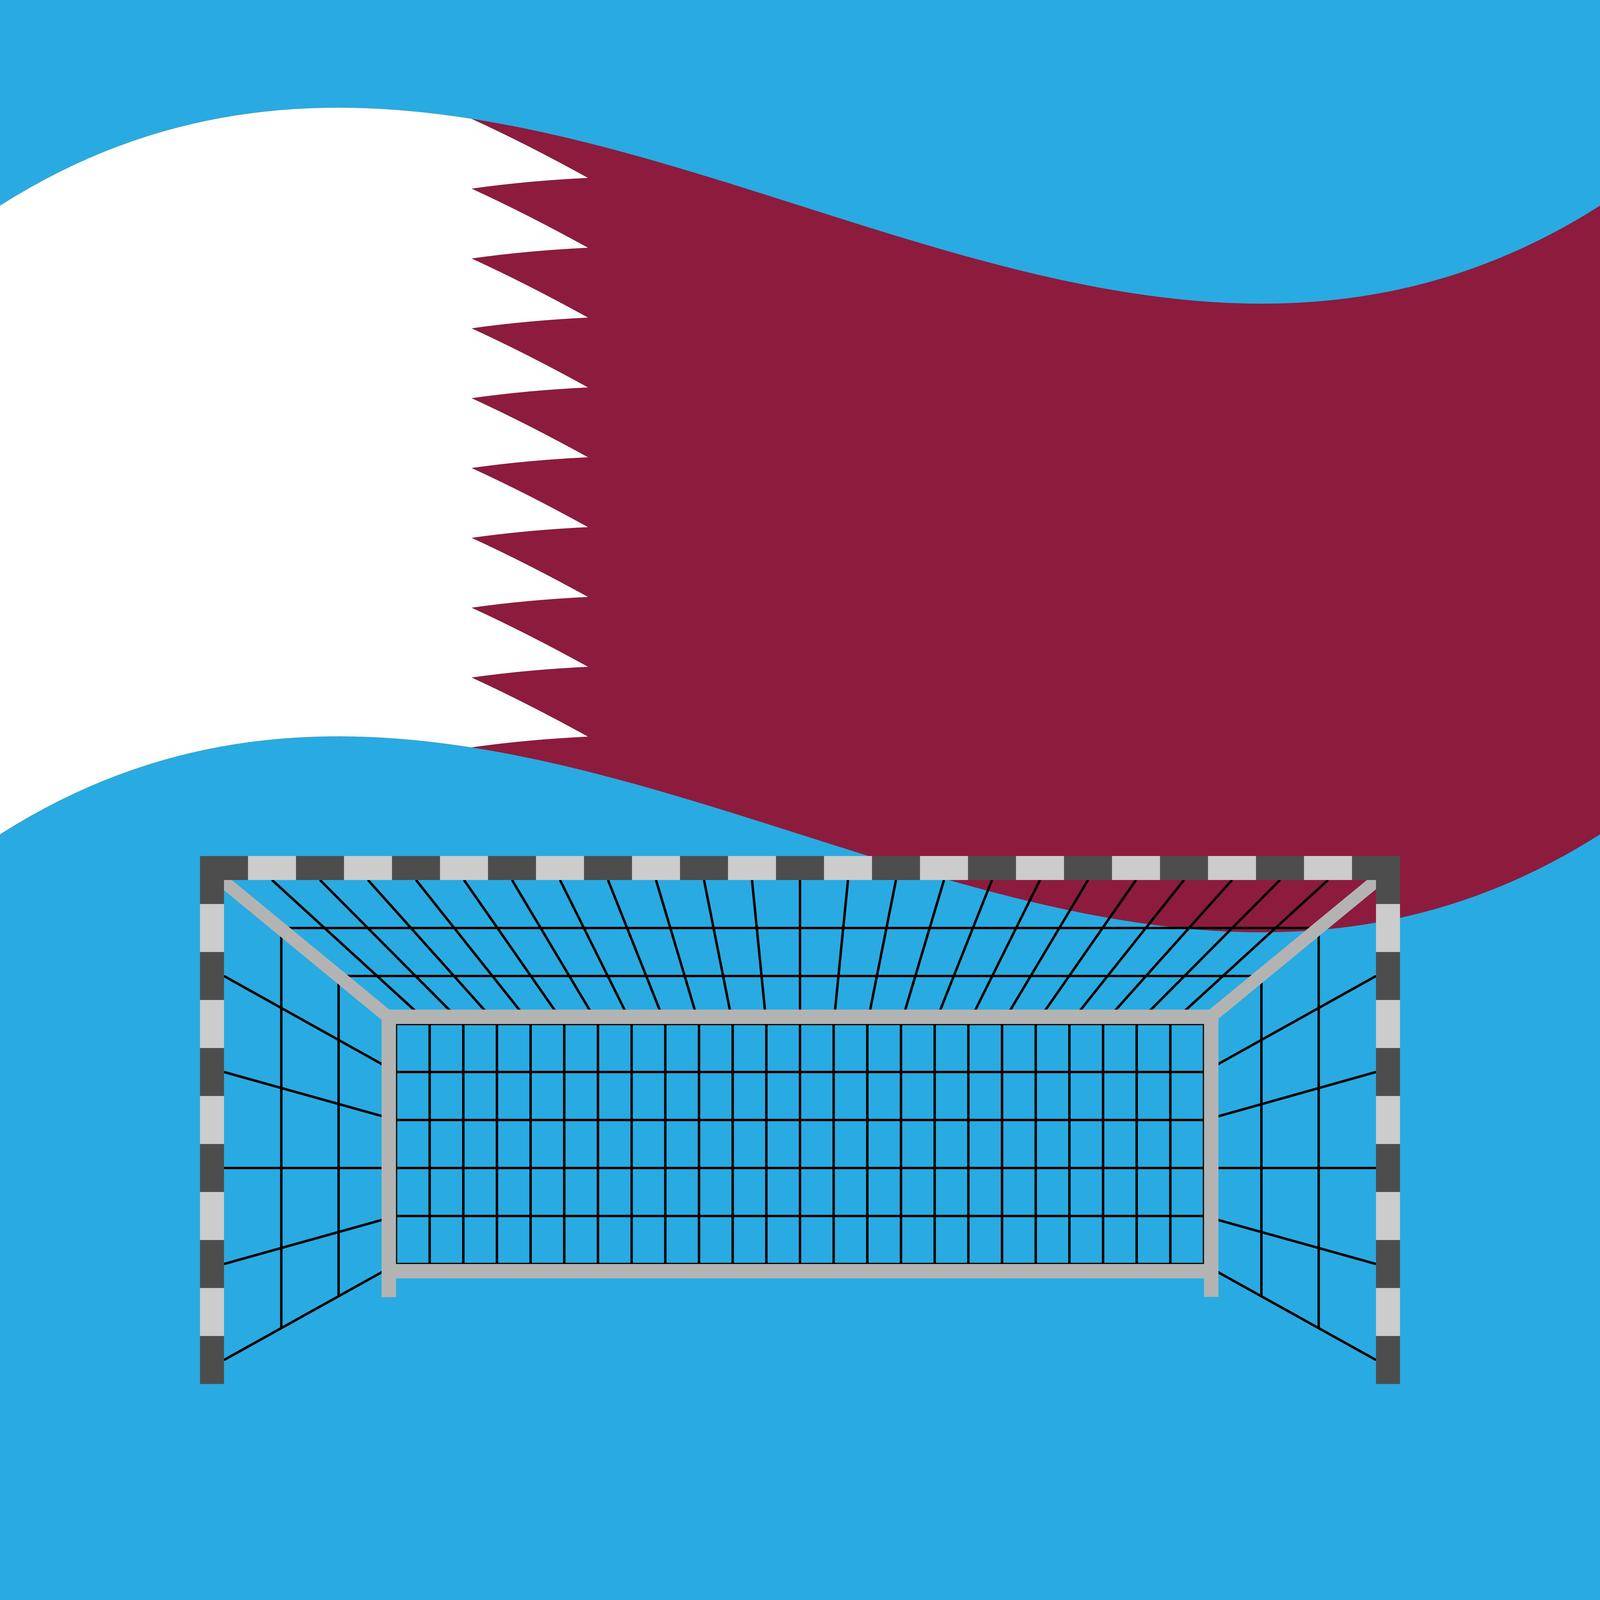 Black and white football equipment. Isolated goal with net for playing football. Front view. Qatar flag behind gate. Blue background. Elements for thematic sports design, competition and championship.